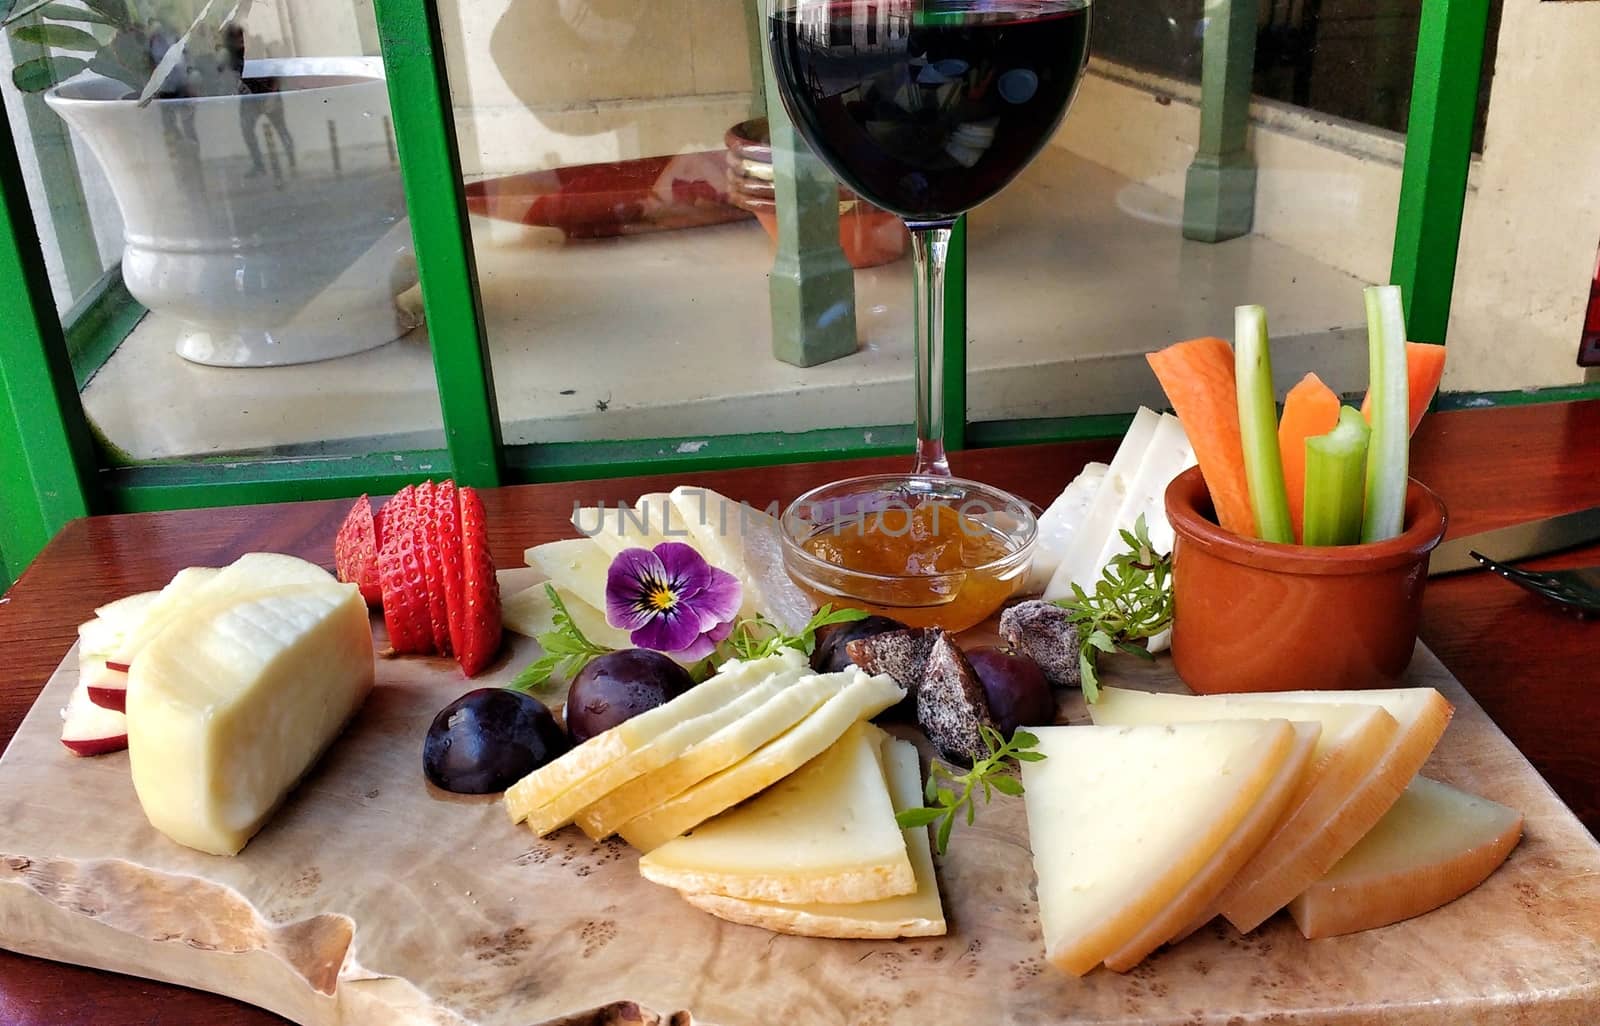 Varied cheese board, vegetables and wine by soniabonet